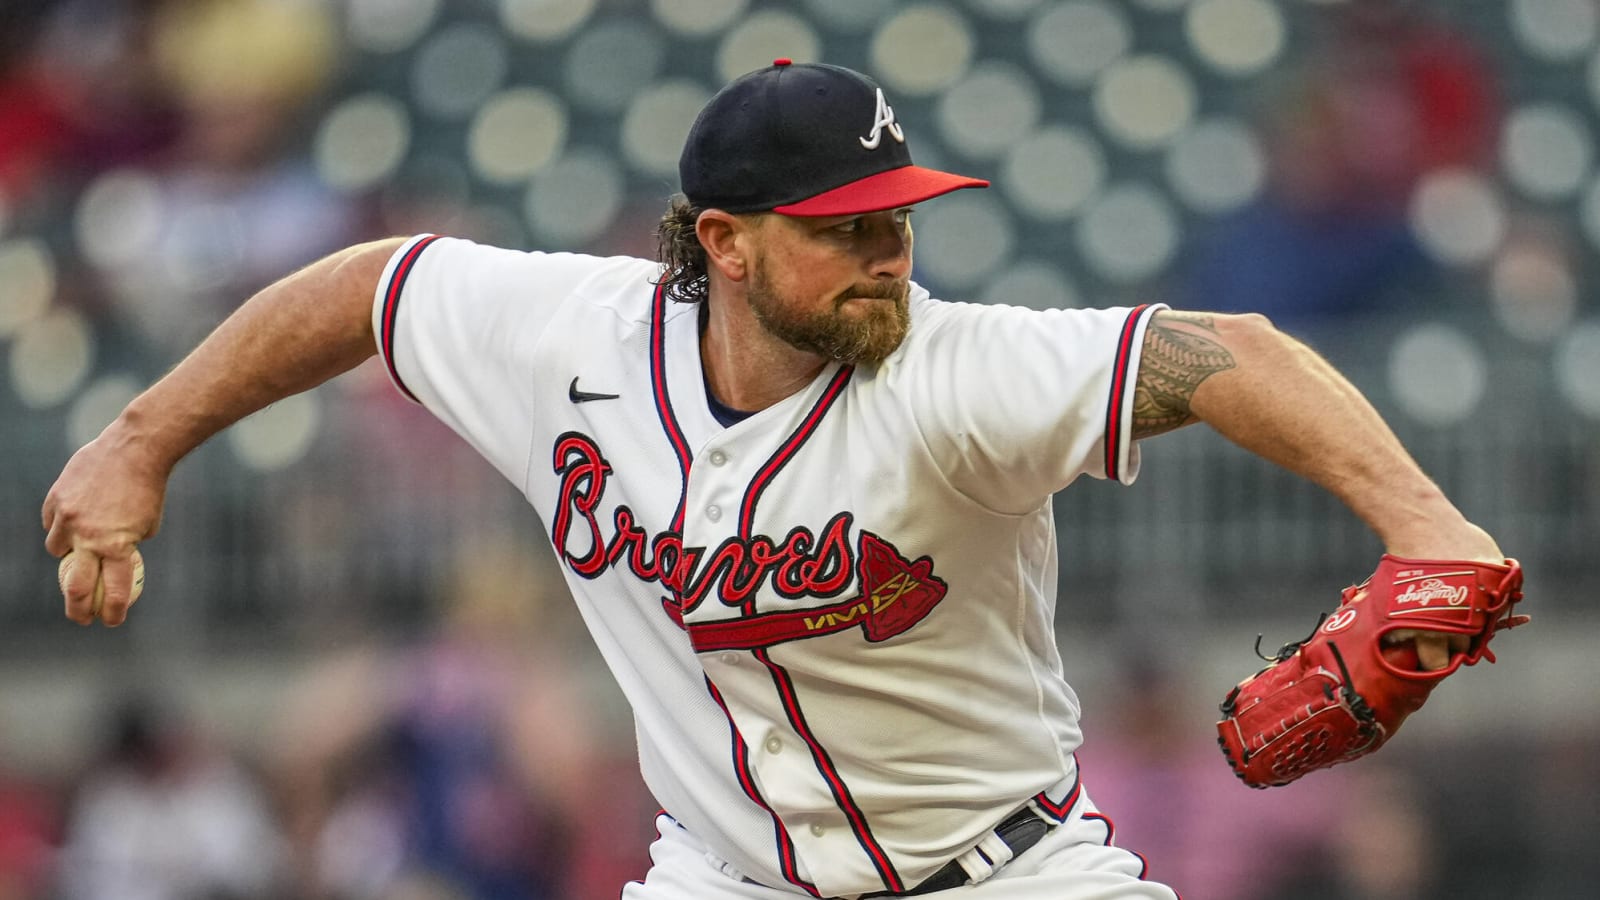 Predicting the 2023 stats of each Braves player — Kirby Yates